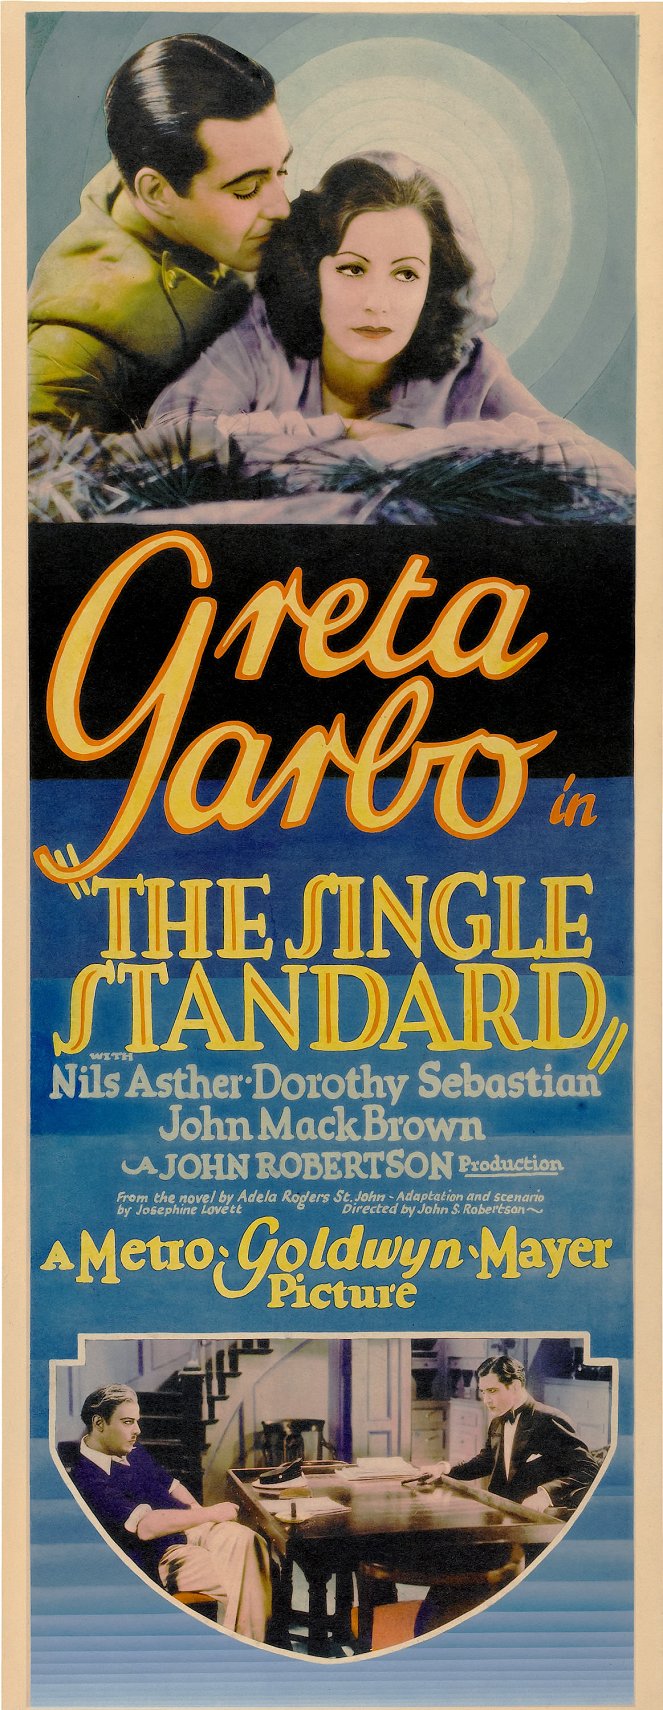 The Single Standard - Posters